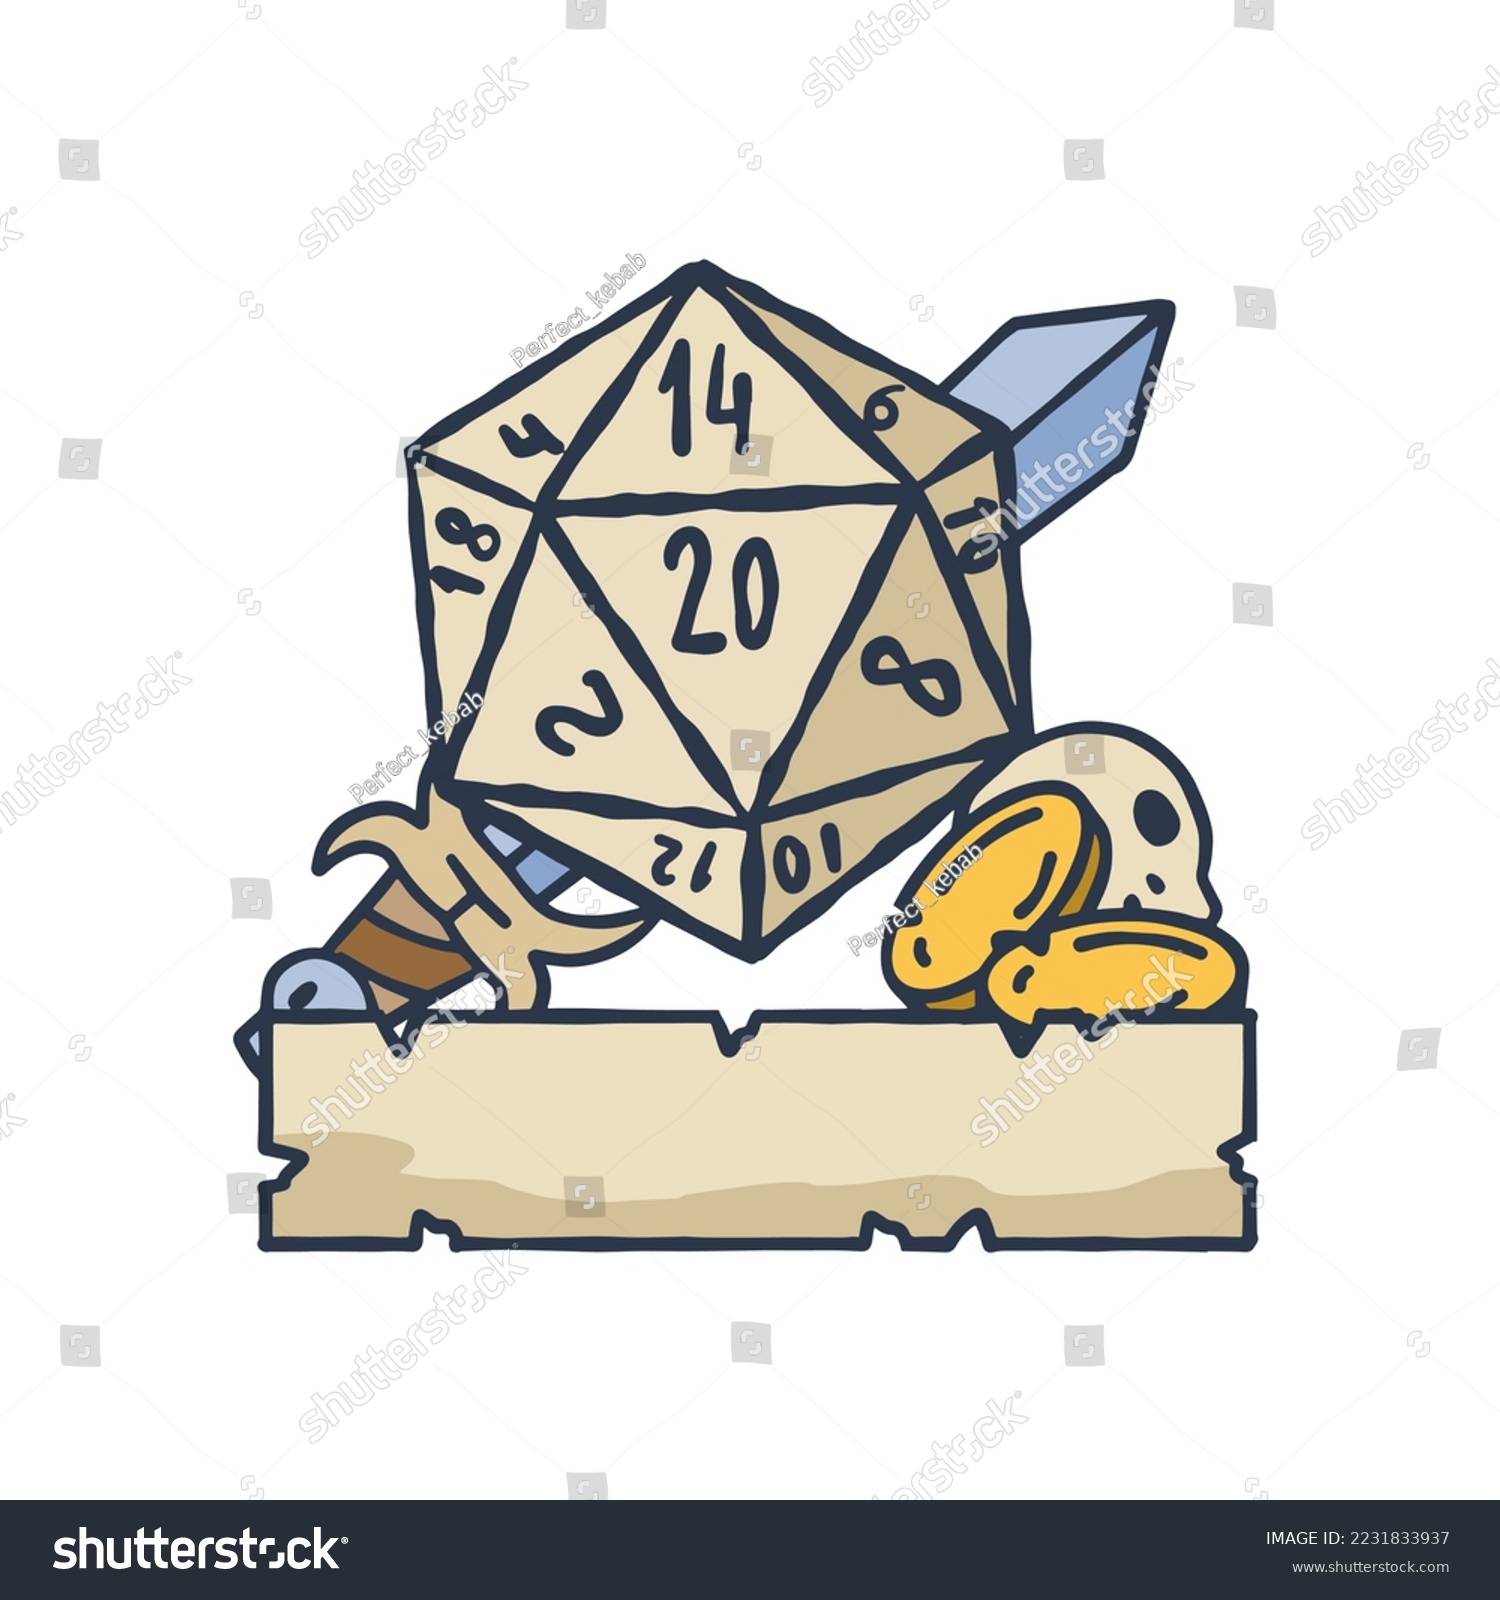 SVG of Dice d20 for playing Dnd. Dungeon and dragons board game with ribbon. Cartoon outline drawn illustration svg